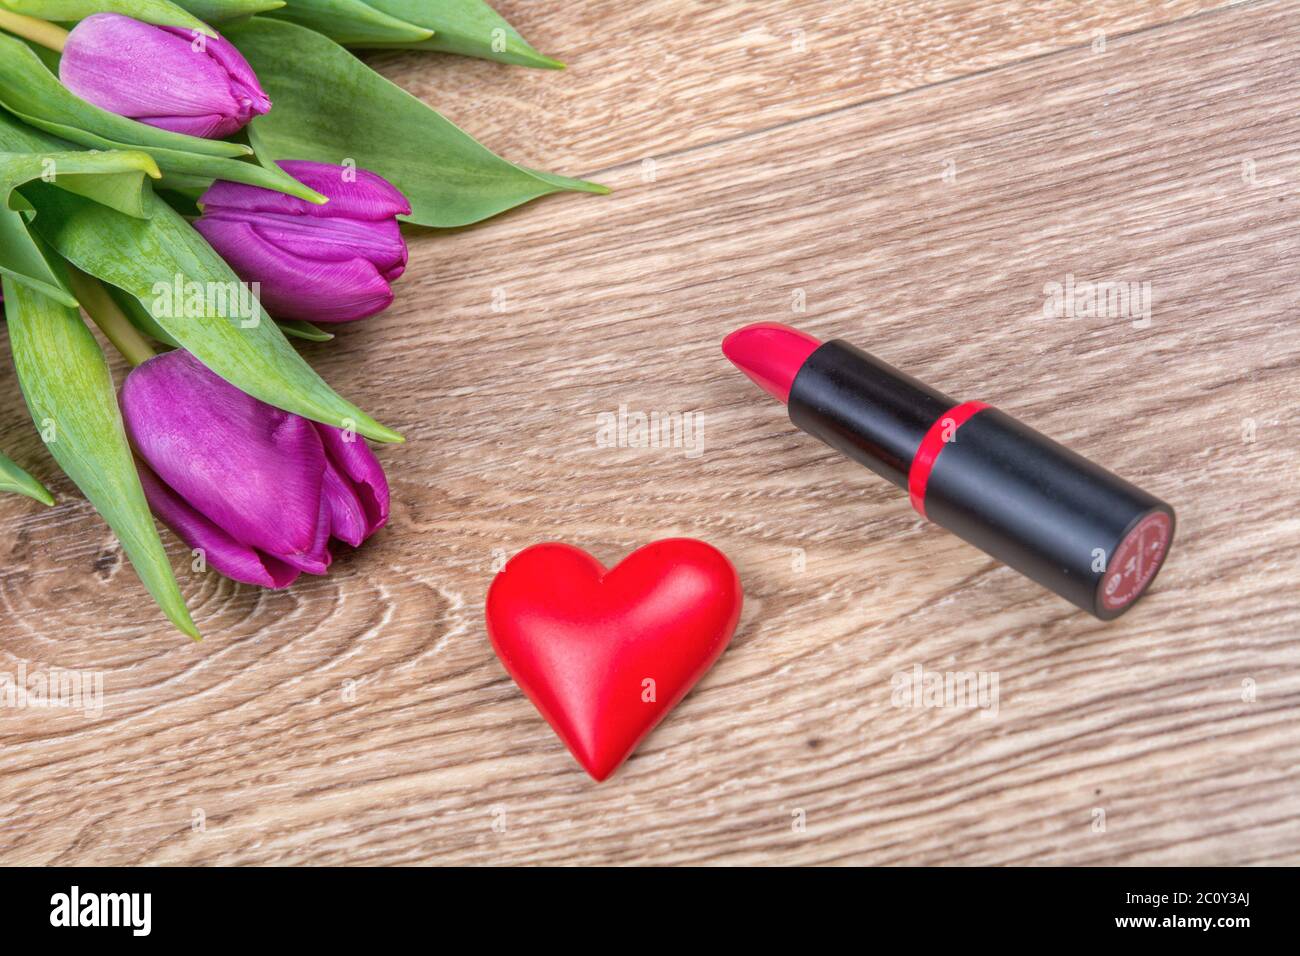 Lipstick, red heart and tulips on a wooden background Stock Photo